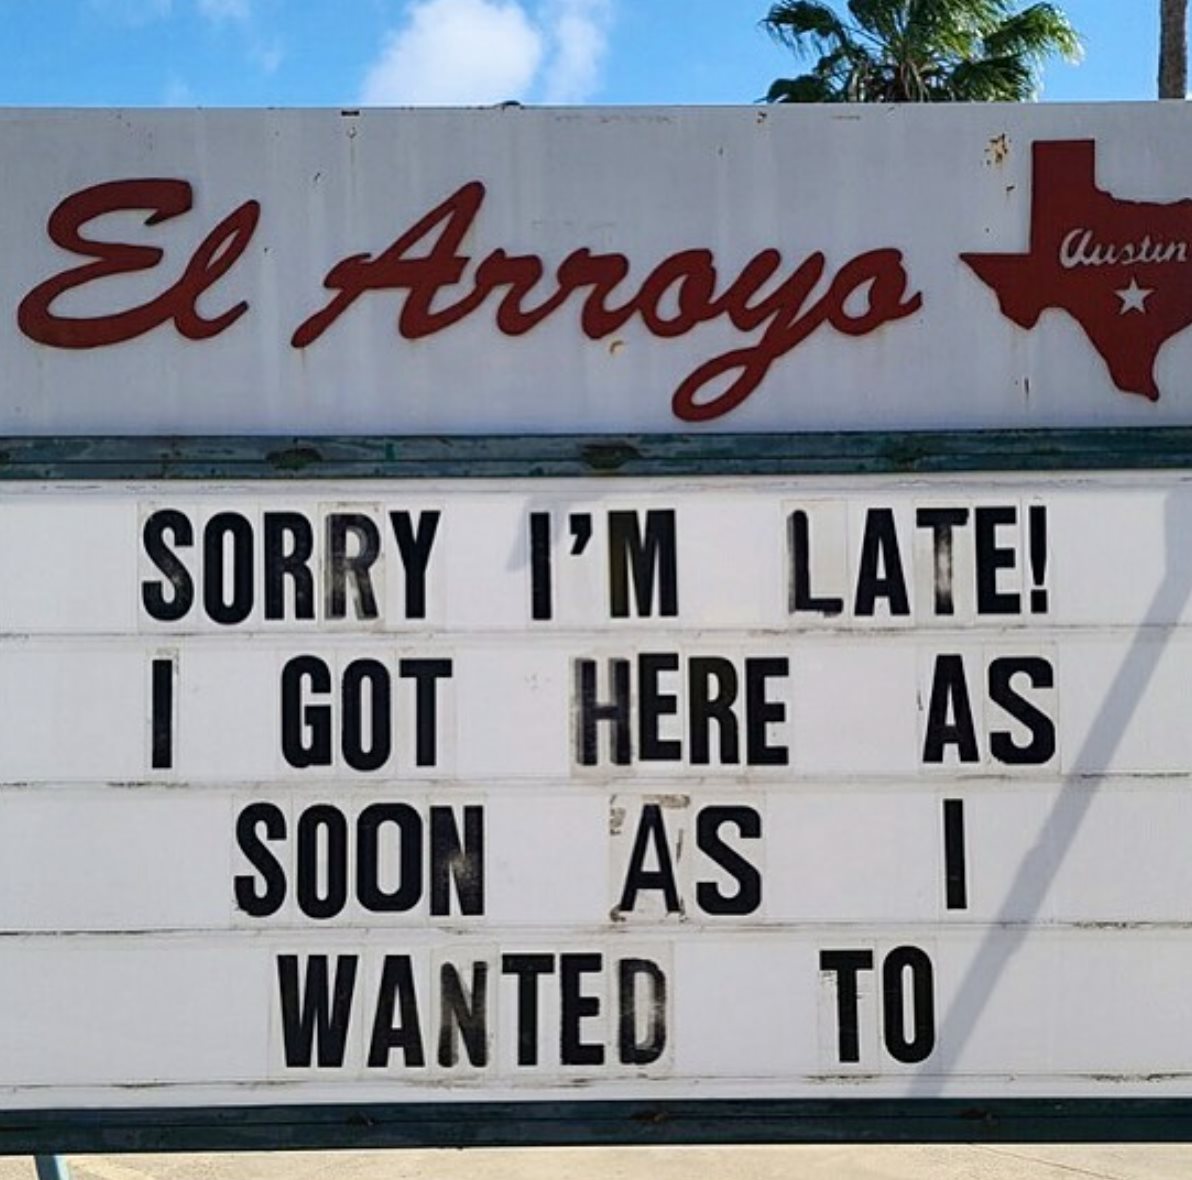 street sign - El Arroyo Austin Sorry I'M Late! | Got Here As Soon As 1 Wanted To